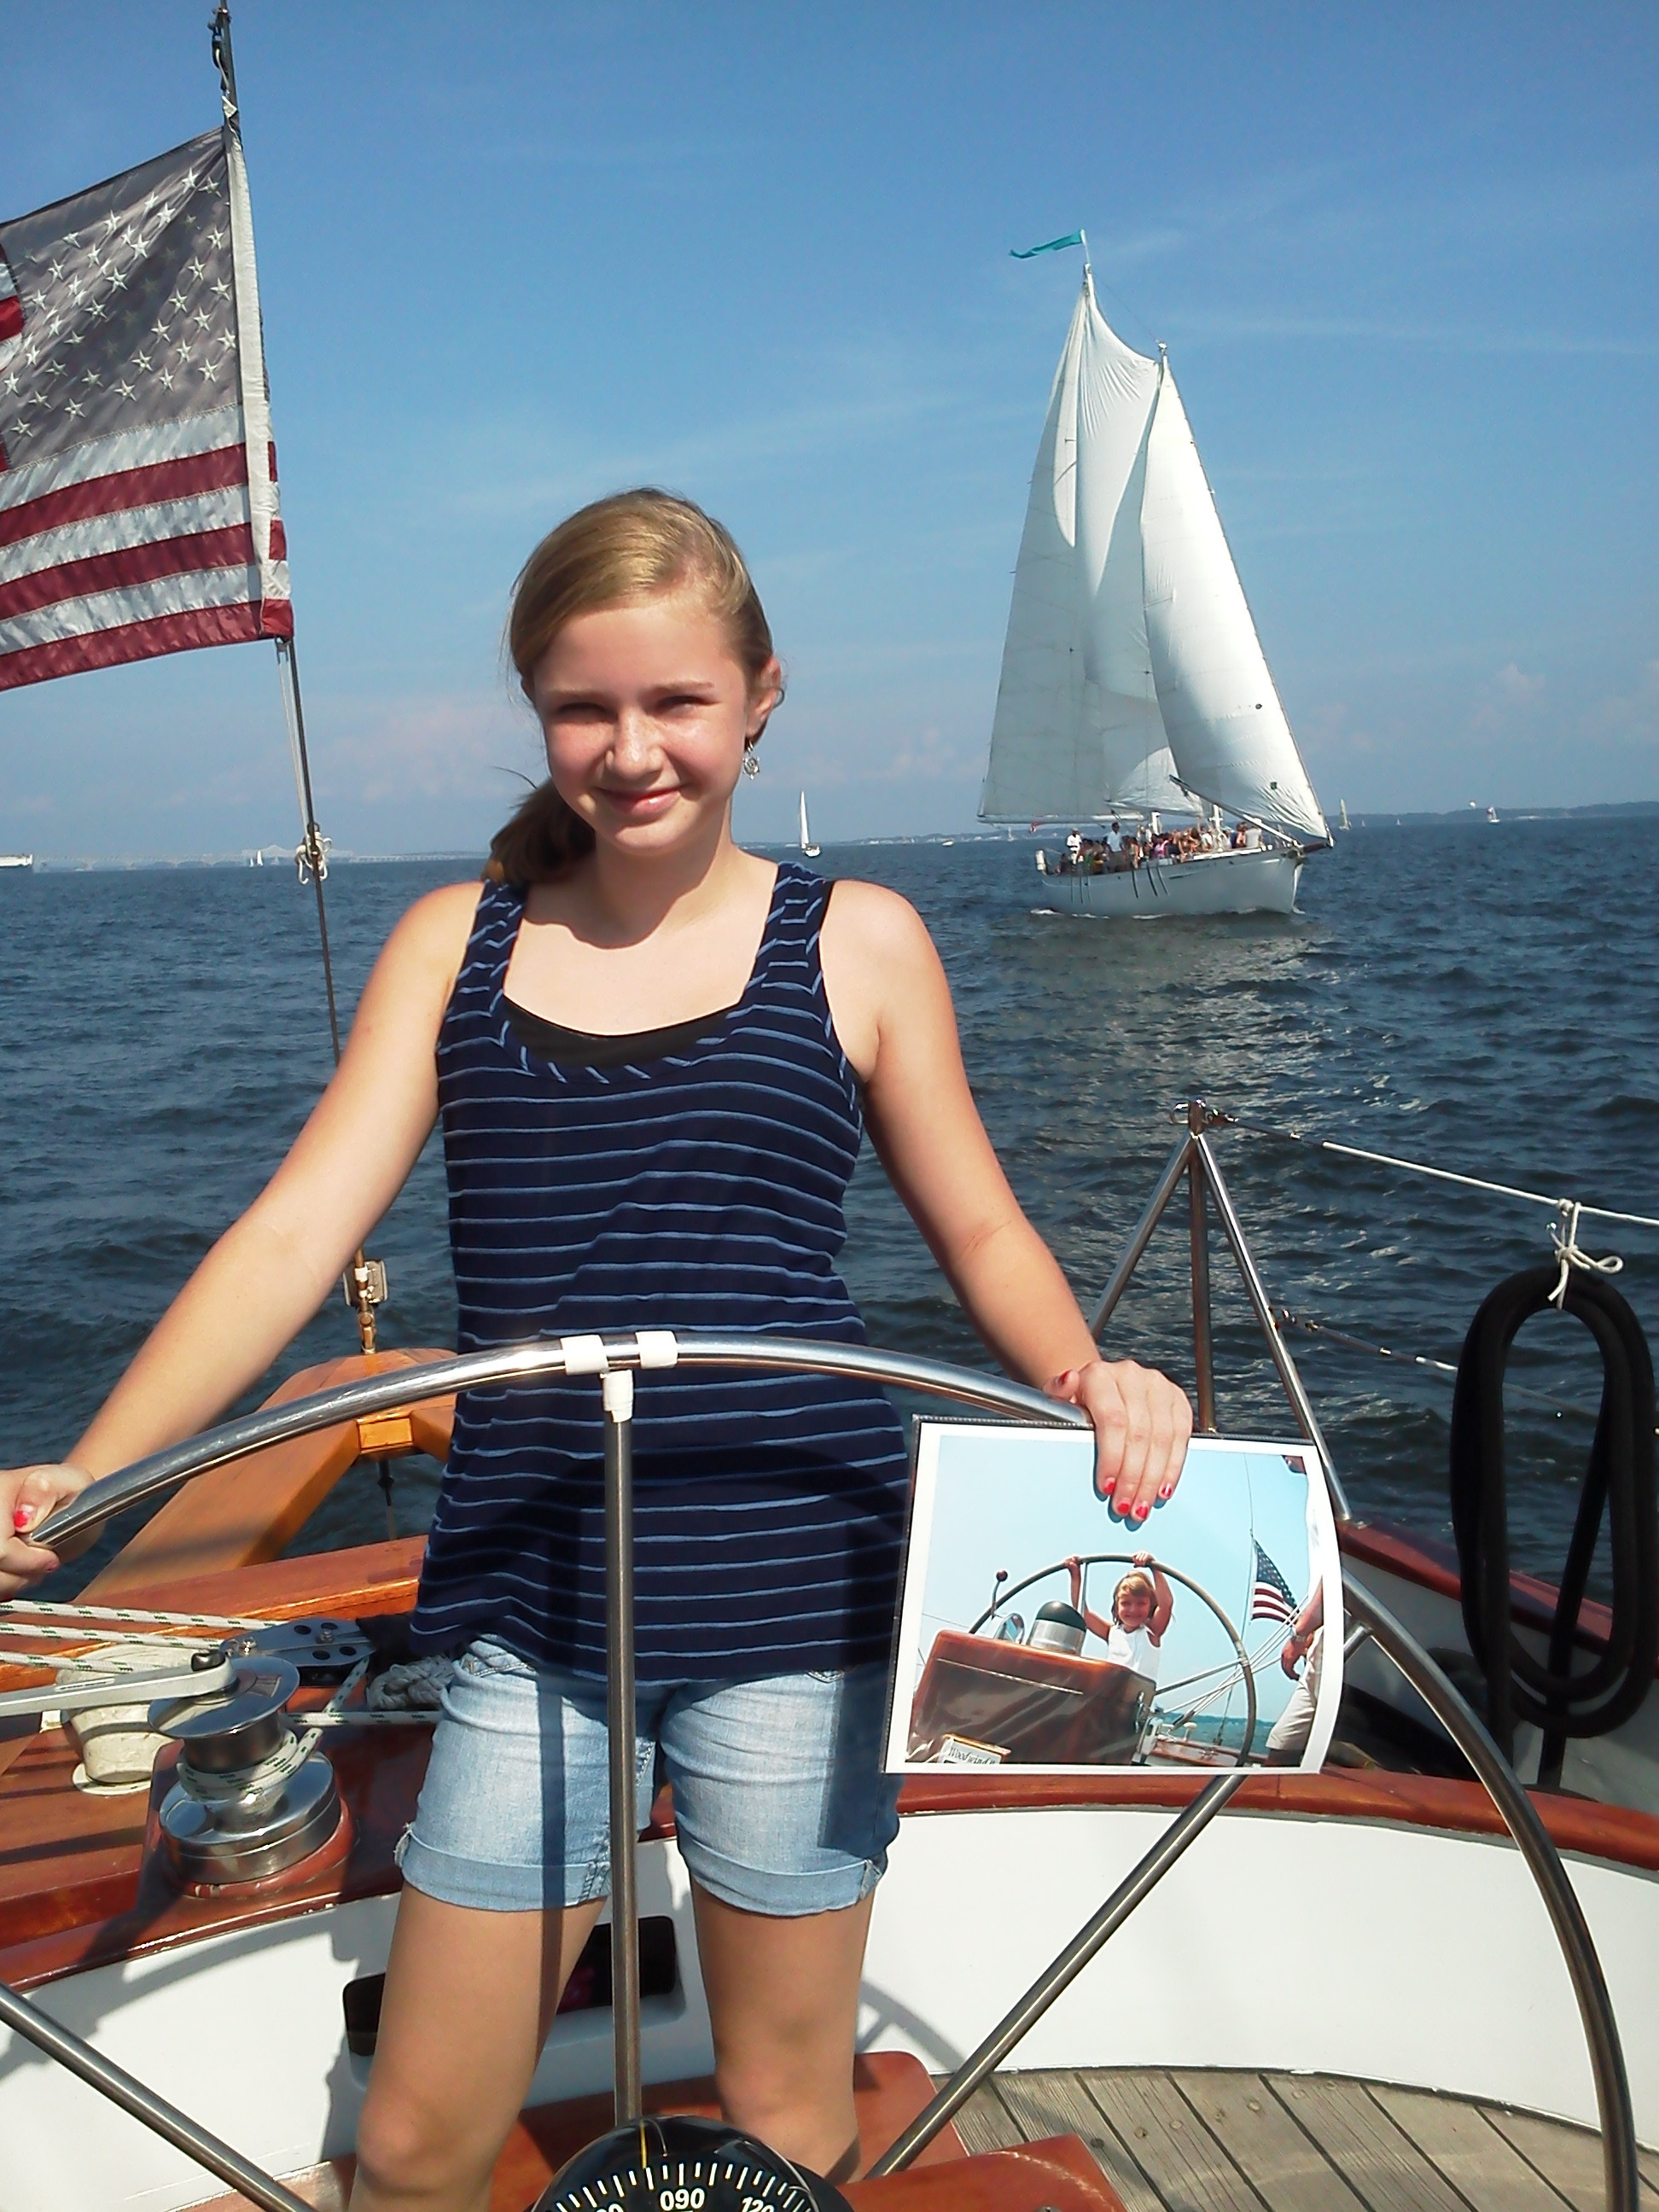 Sailing the Woodwind again. Holding up picture of when she was little and sailed